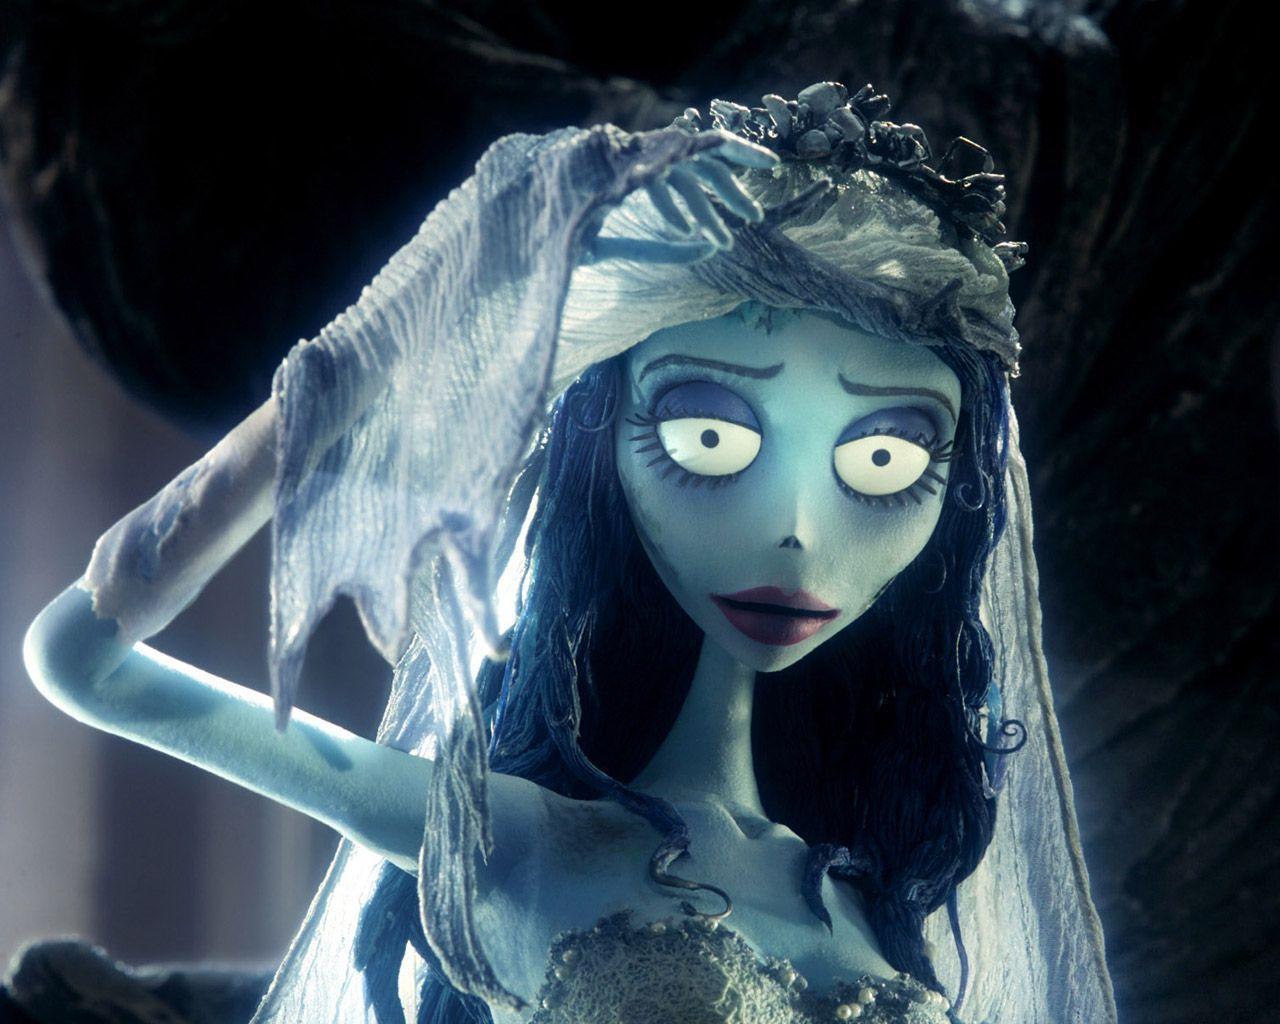 image For > Corpse Bride Wallpaper High Resolution